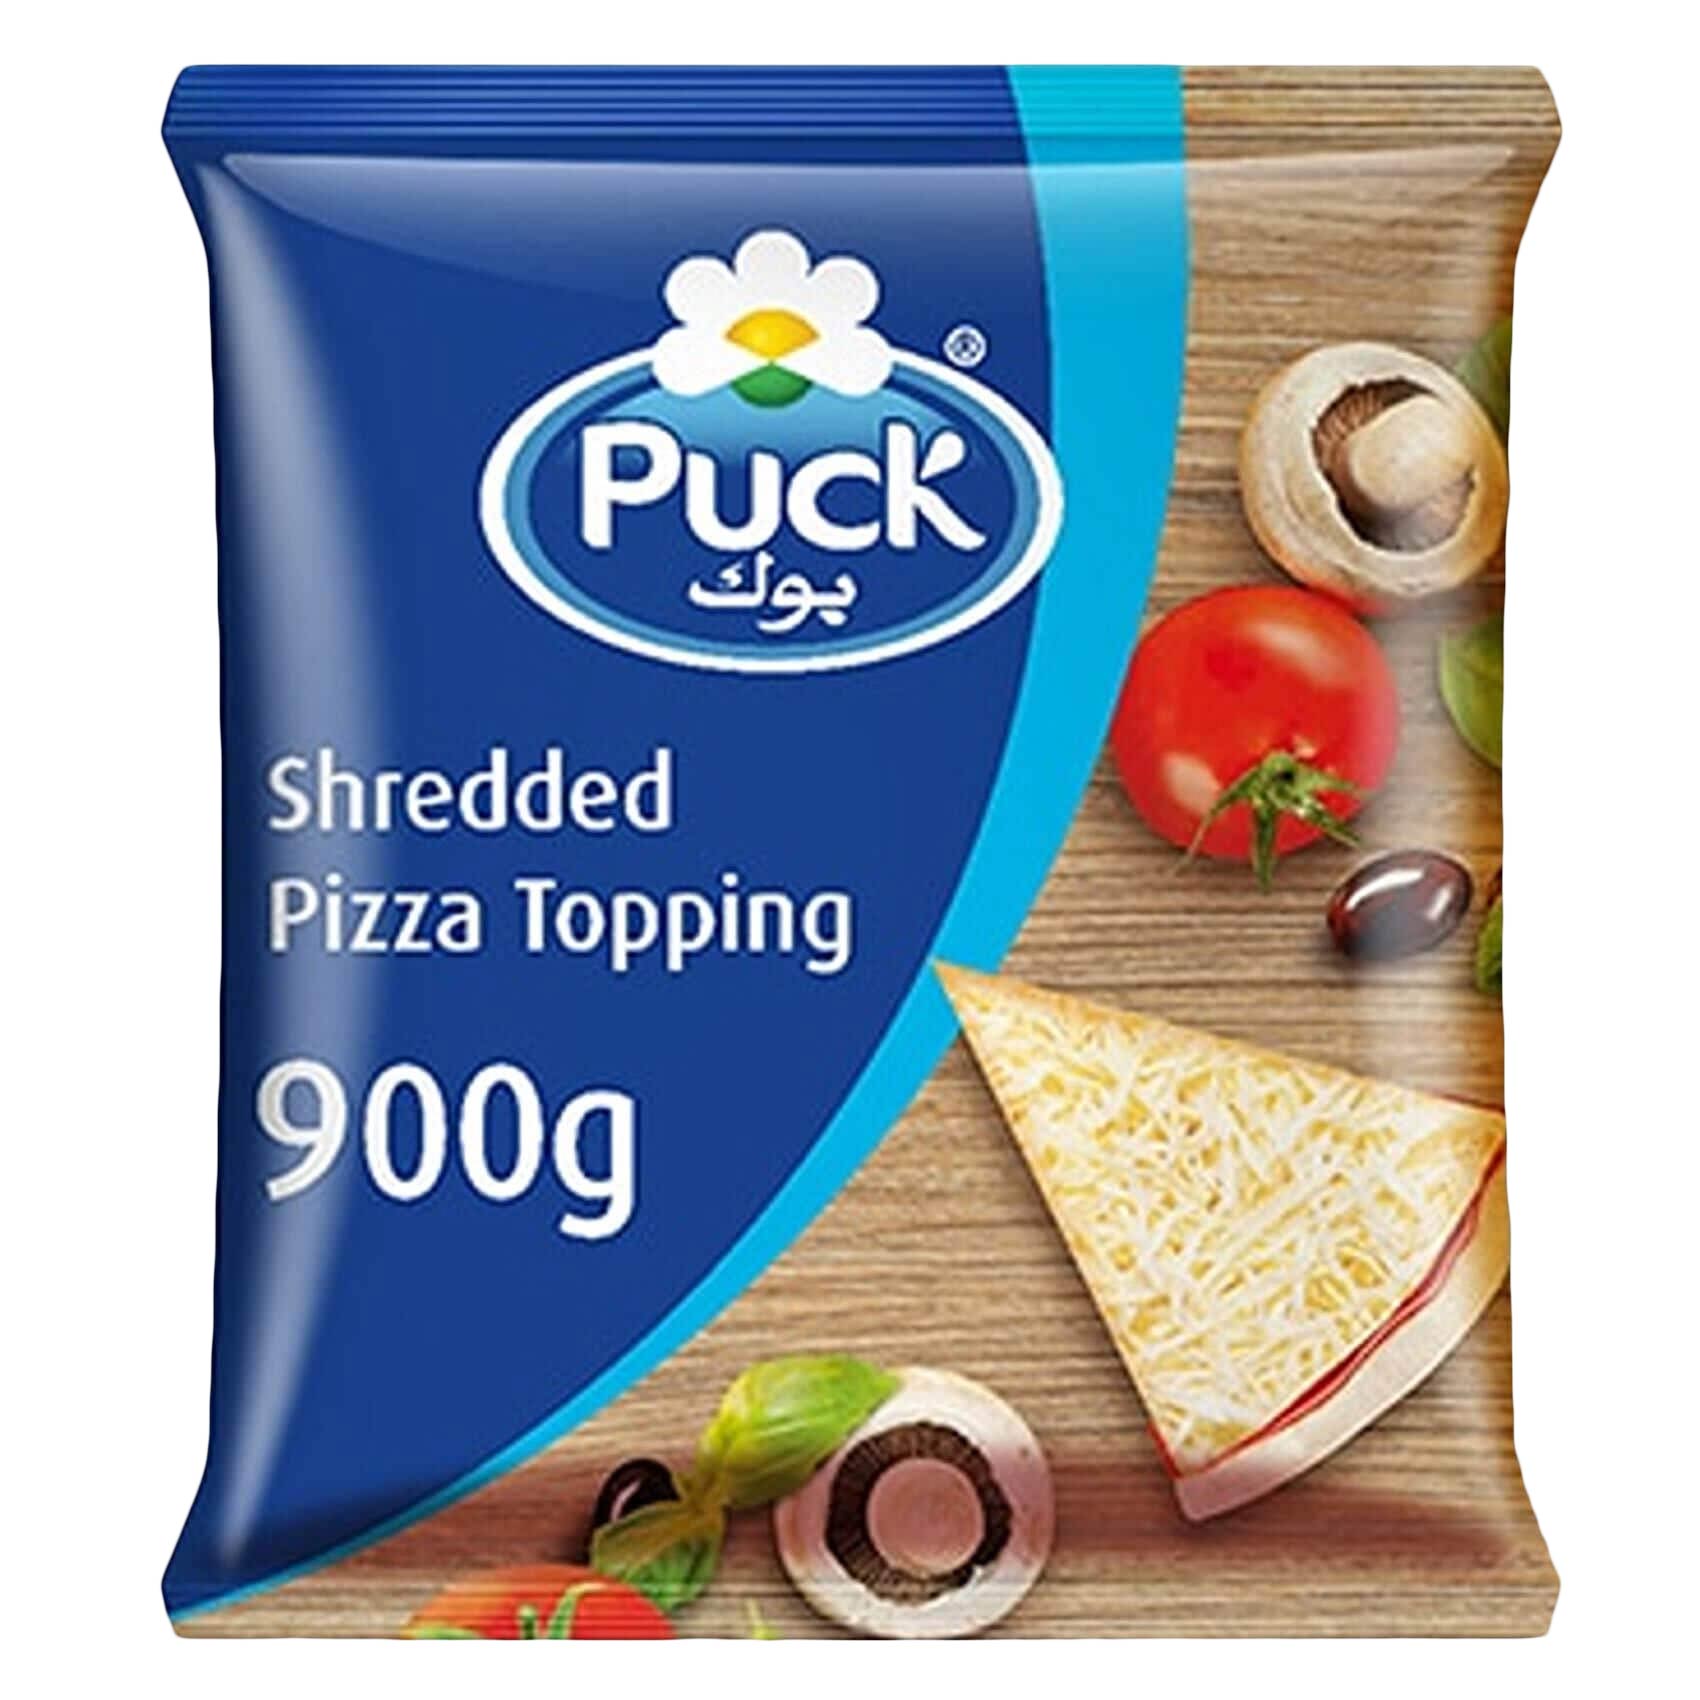 Puck Shredded Pizza Topping 900g